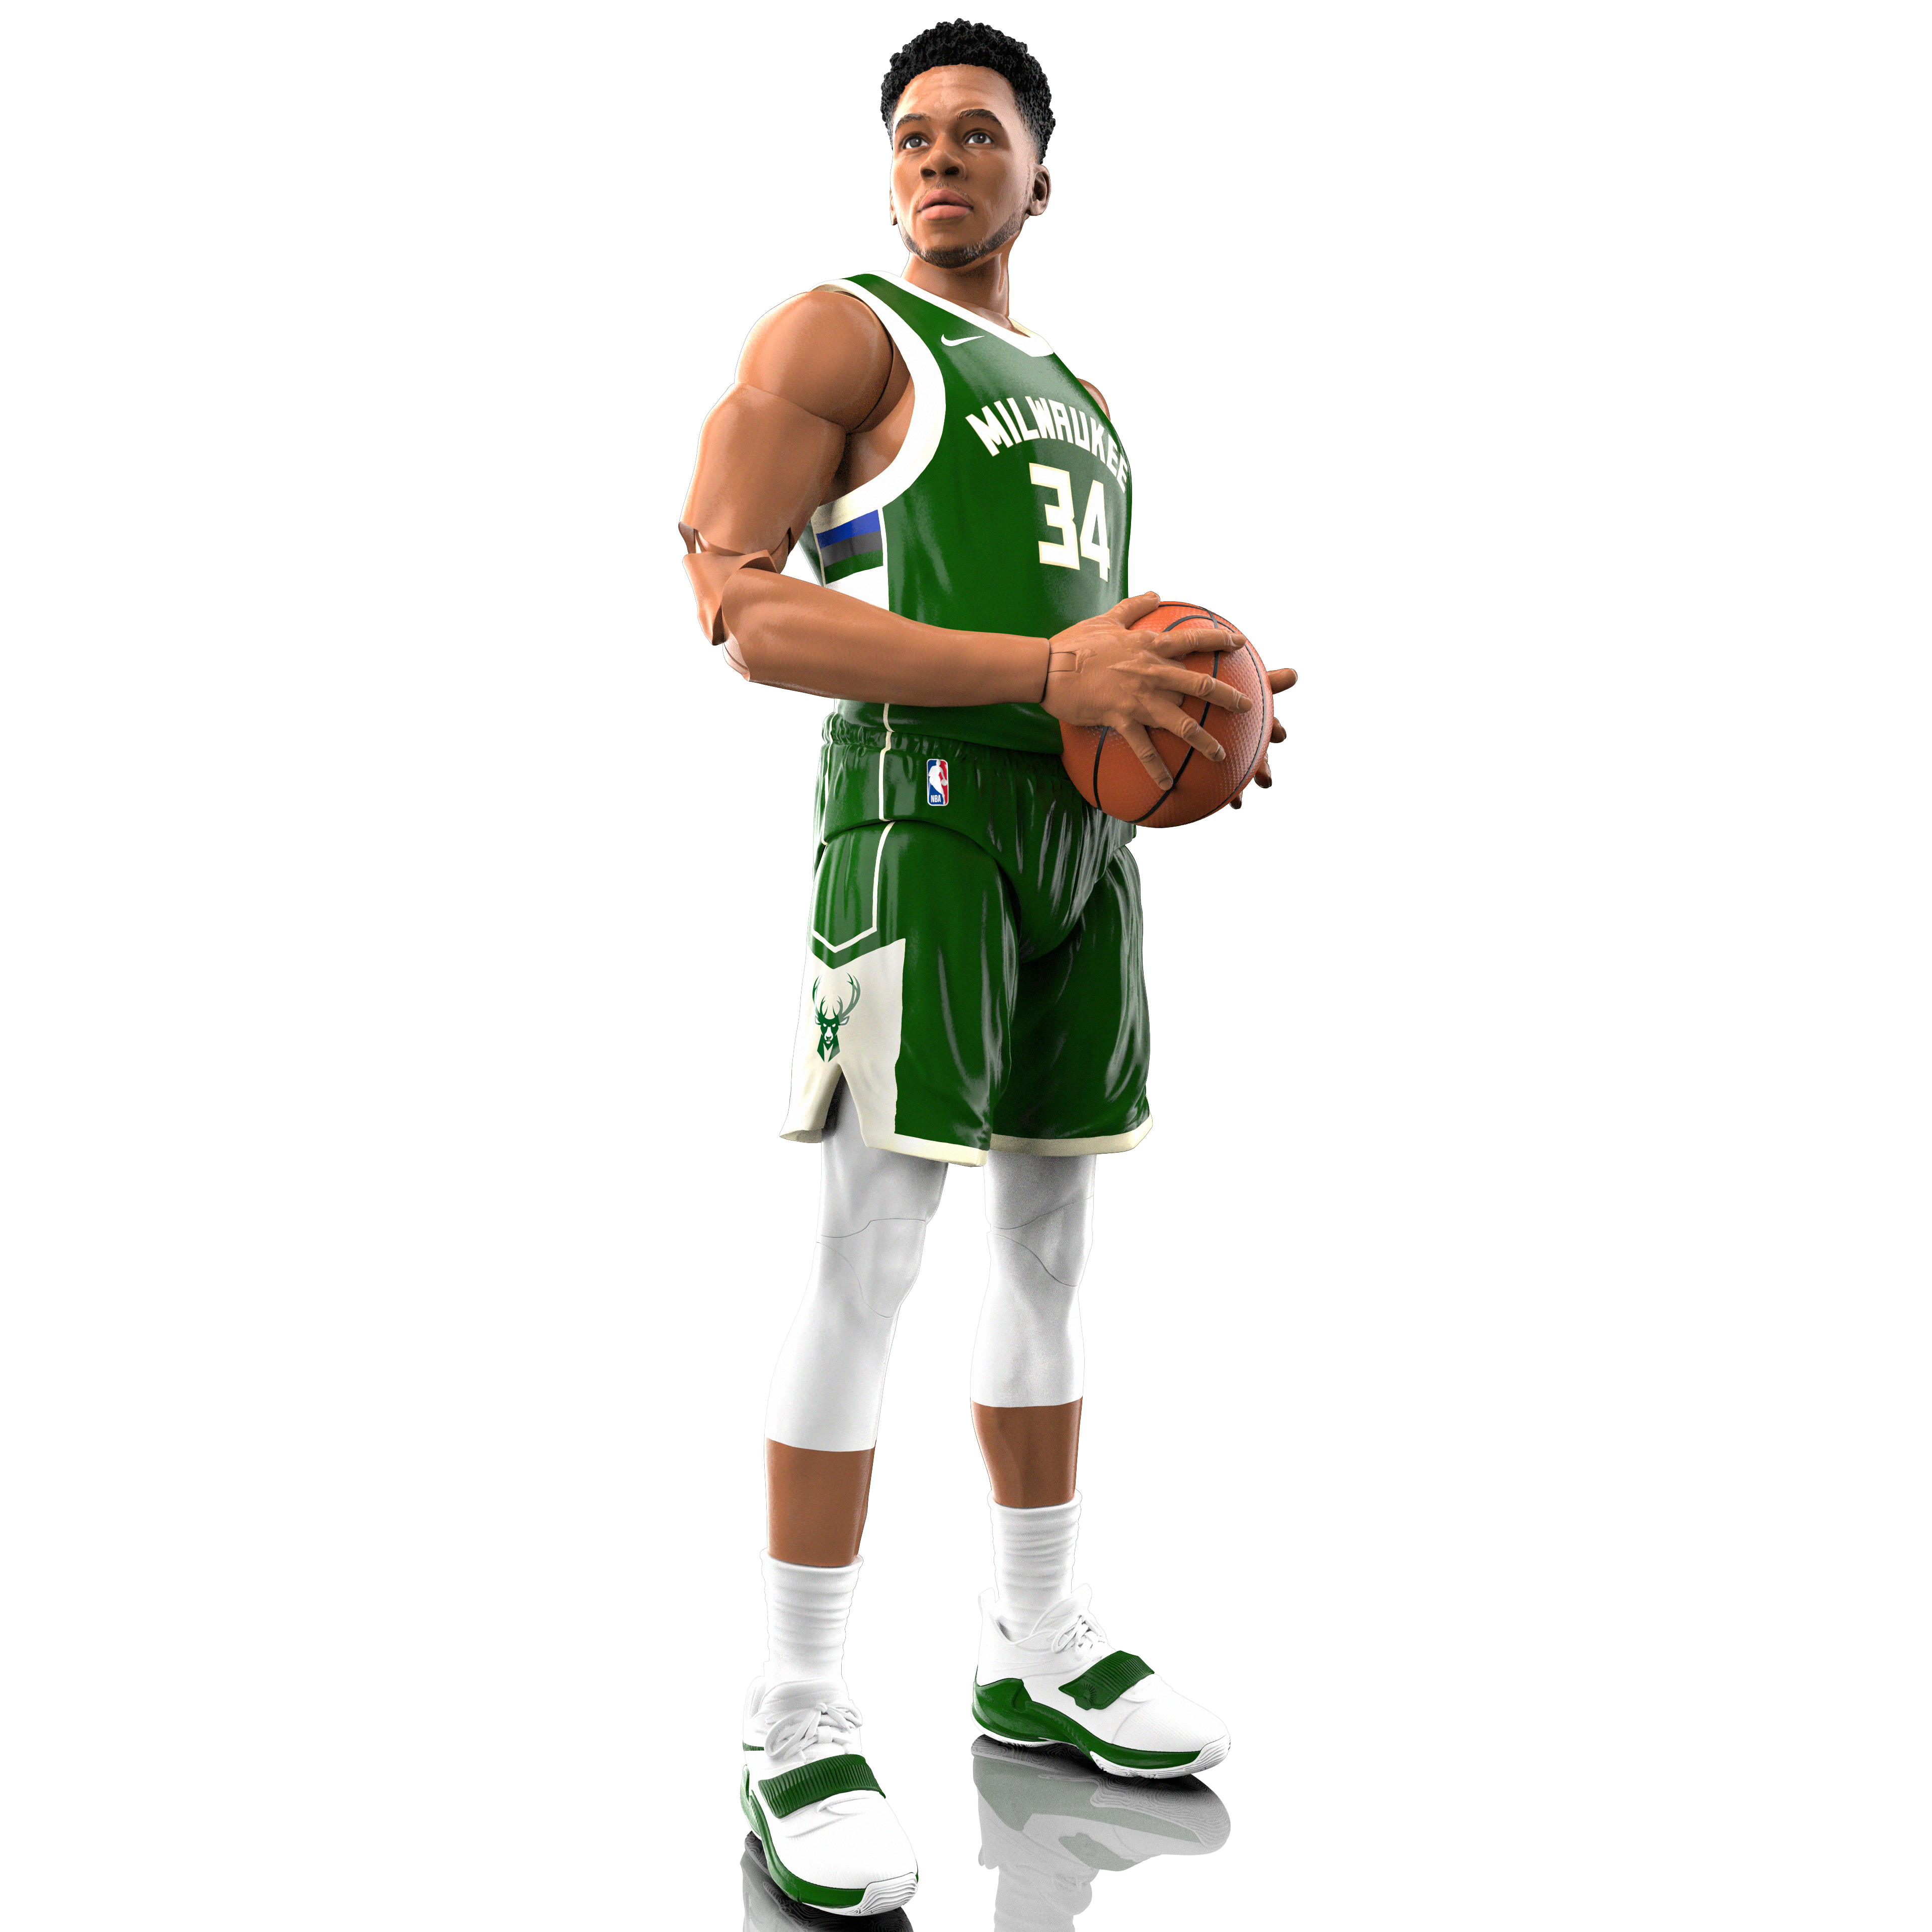 Starting Lineup’s Giannis Antetokounmpo Action Figure Captures the Greatness of the Greek Freak